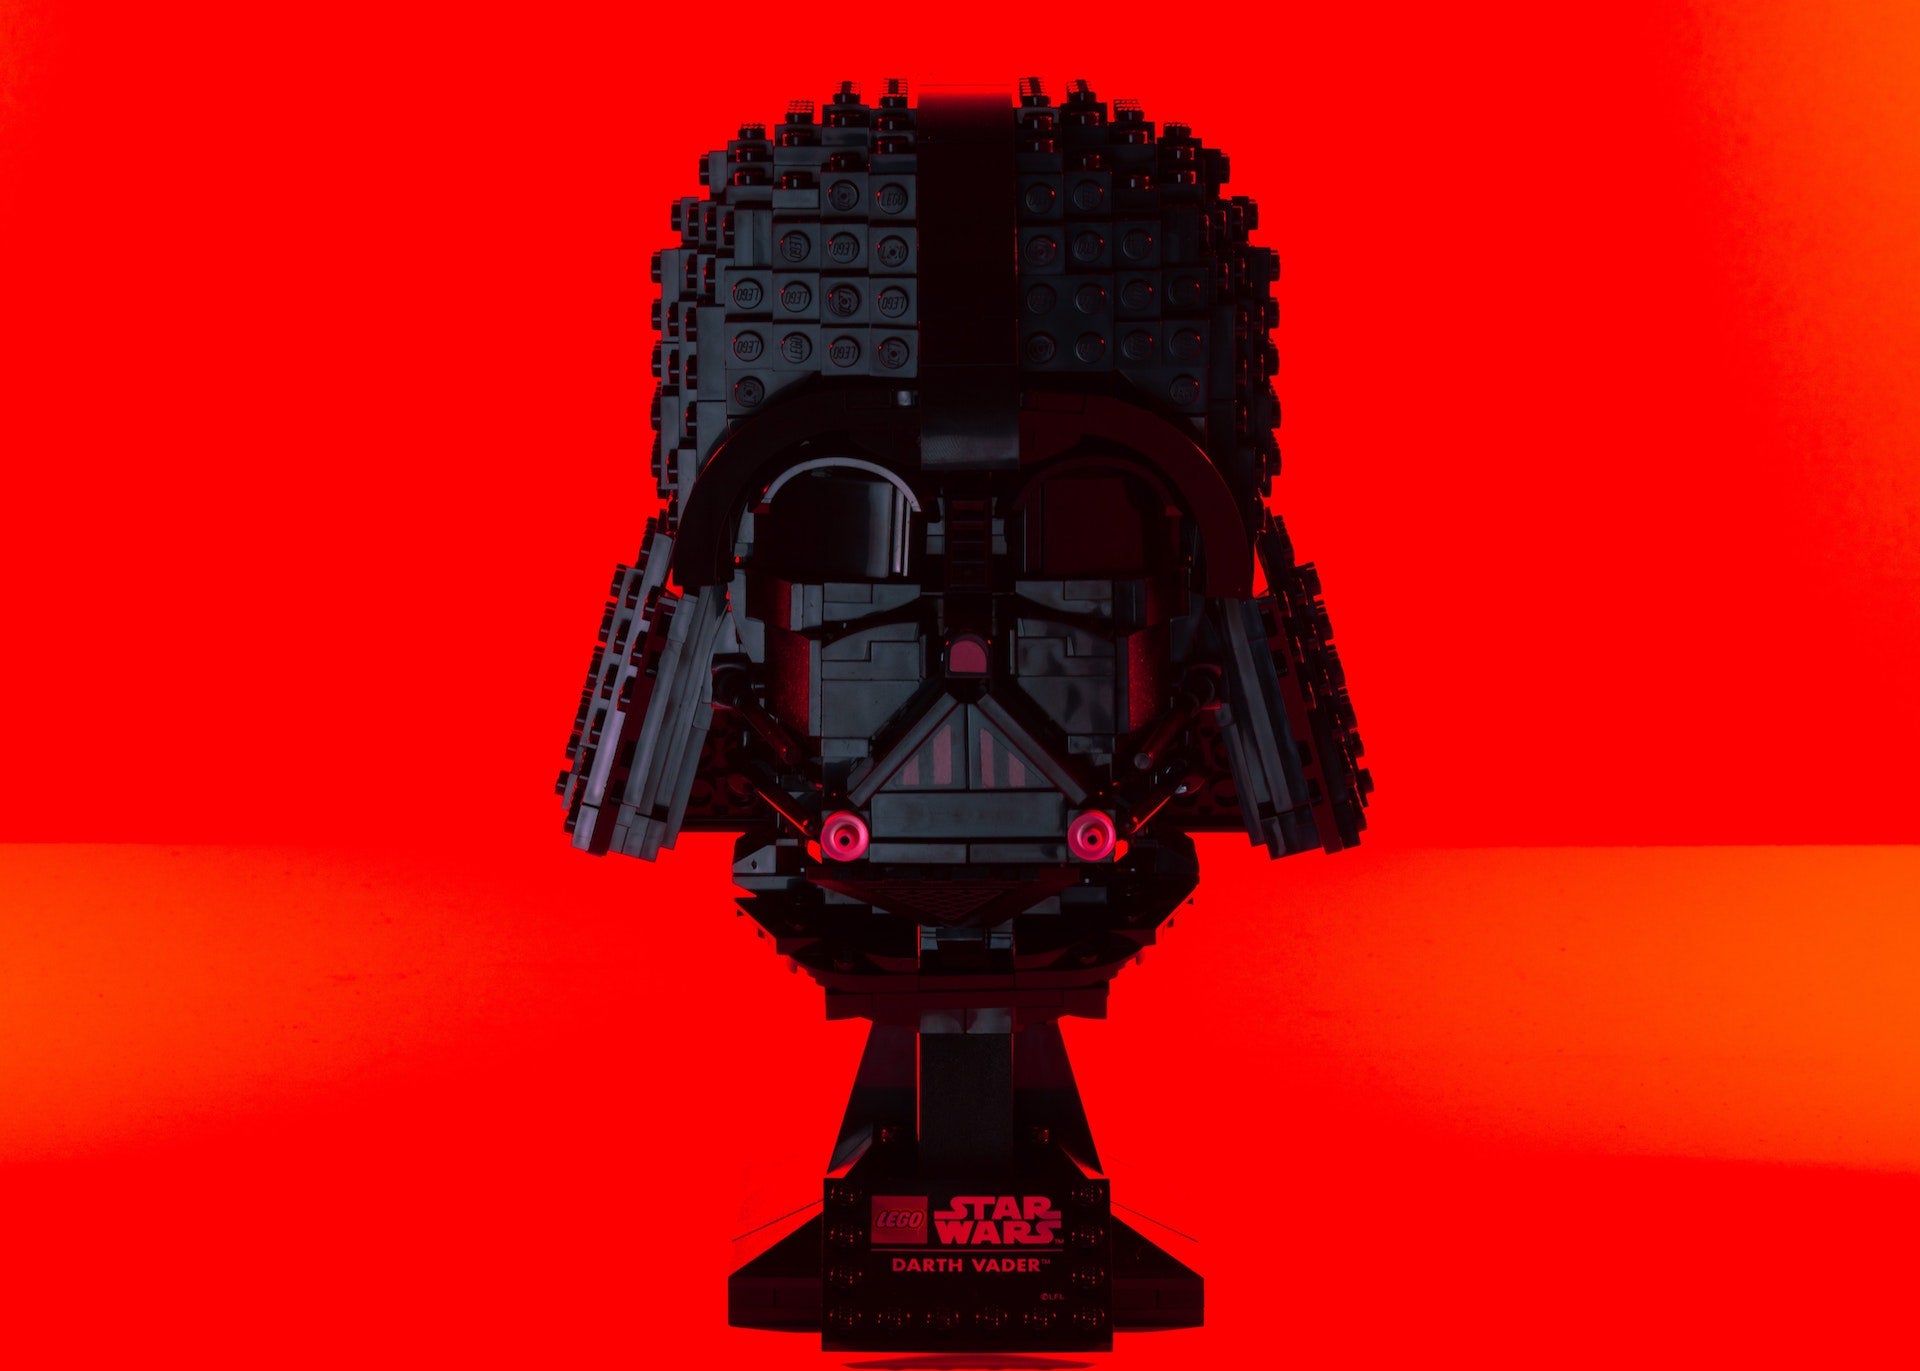 a darth vader helmet made out of lego. silhuetted against a red background.